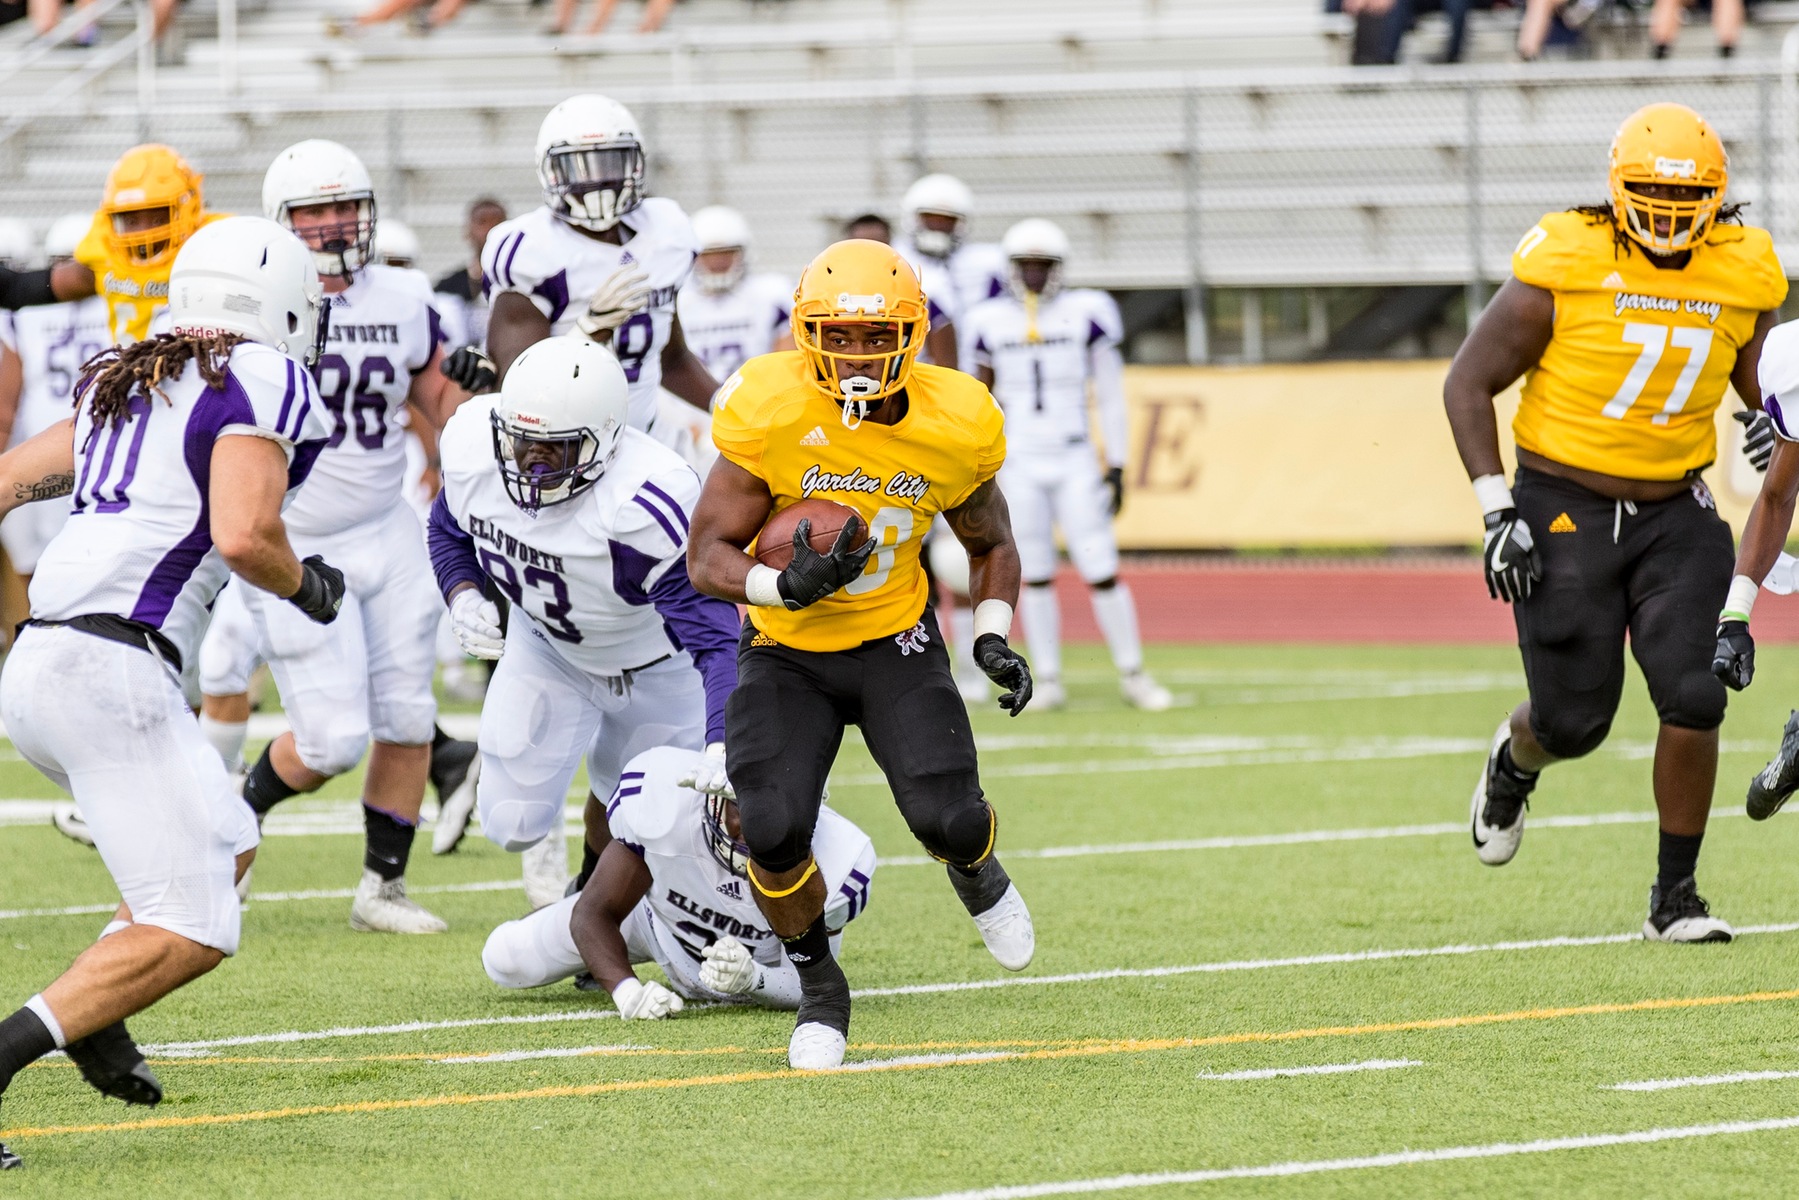 Running into the night; Broncbusters dominate Ellsworth